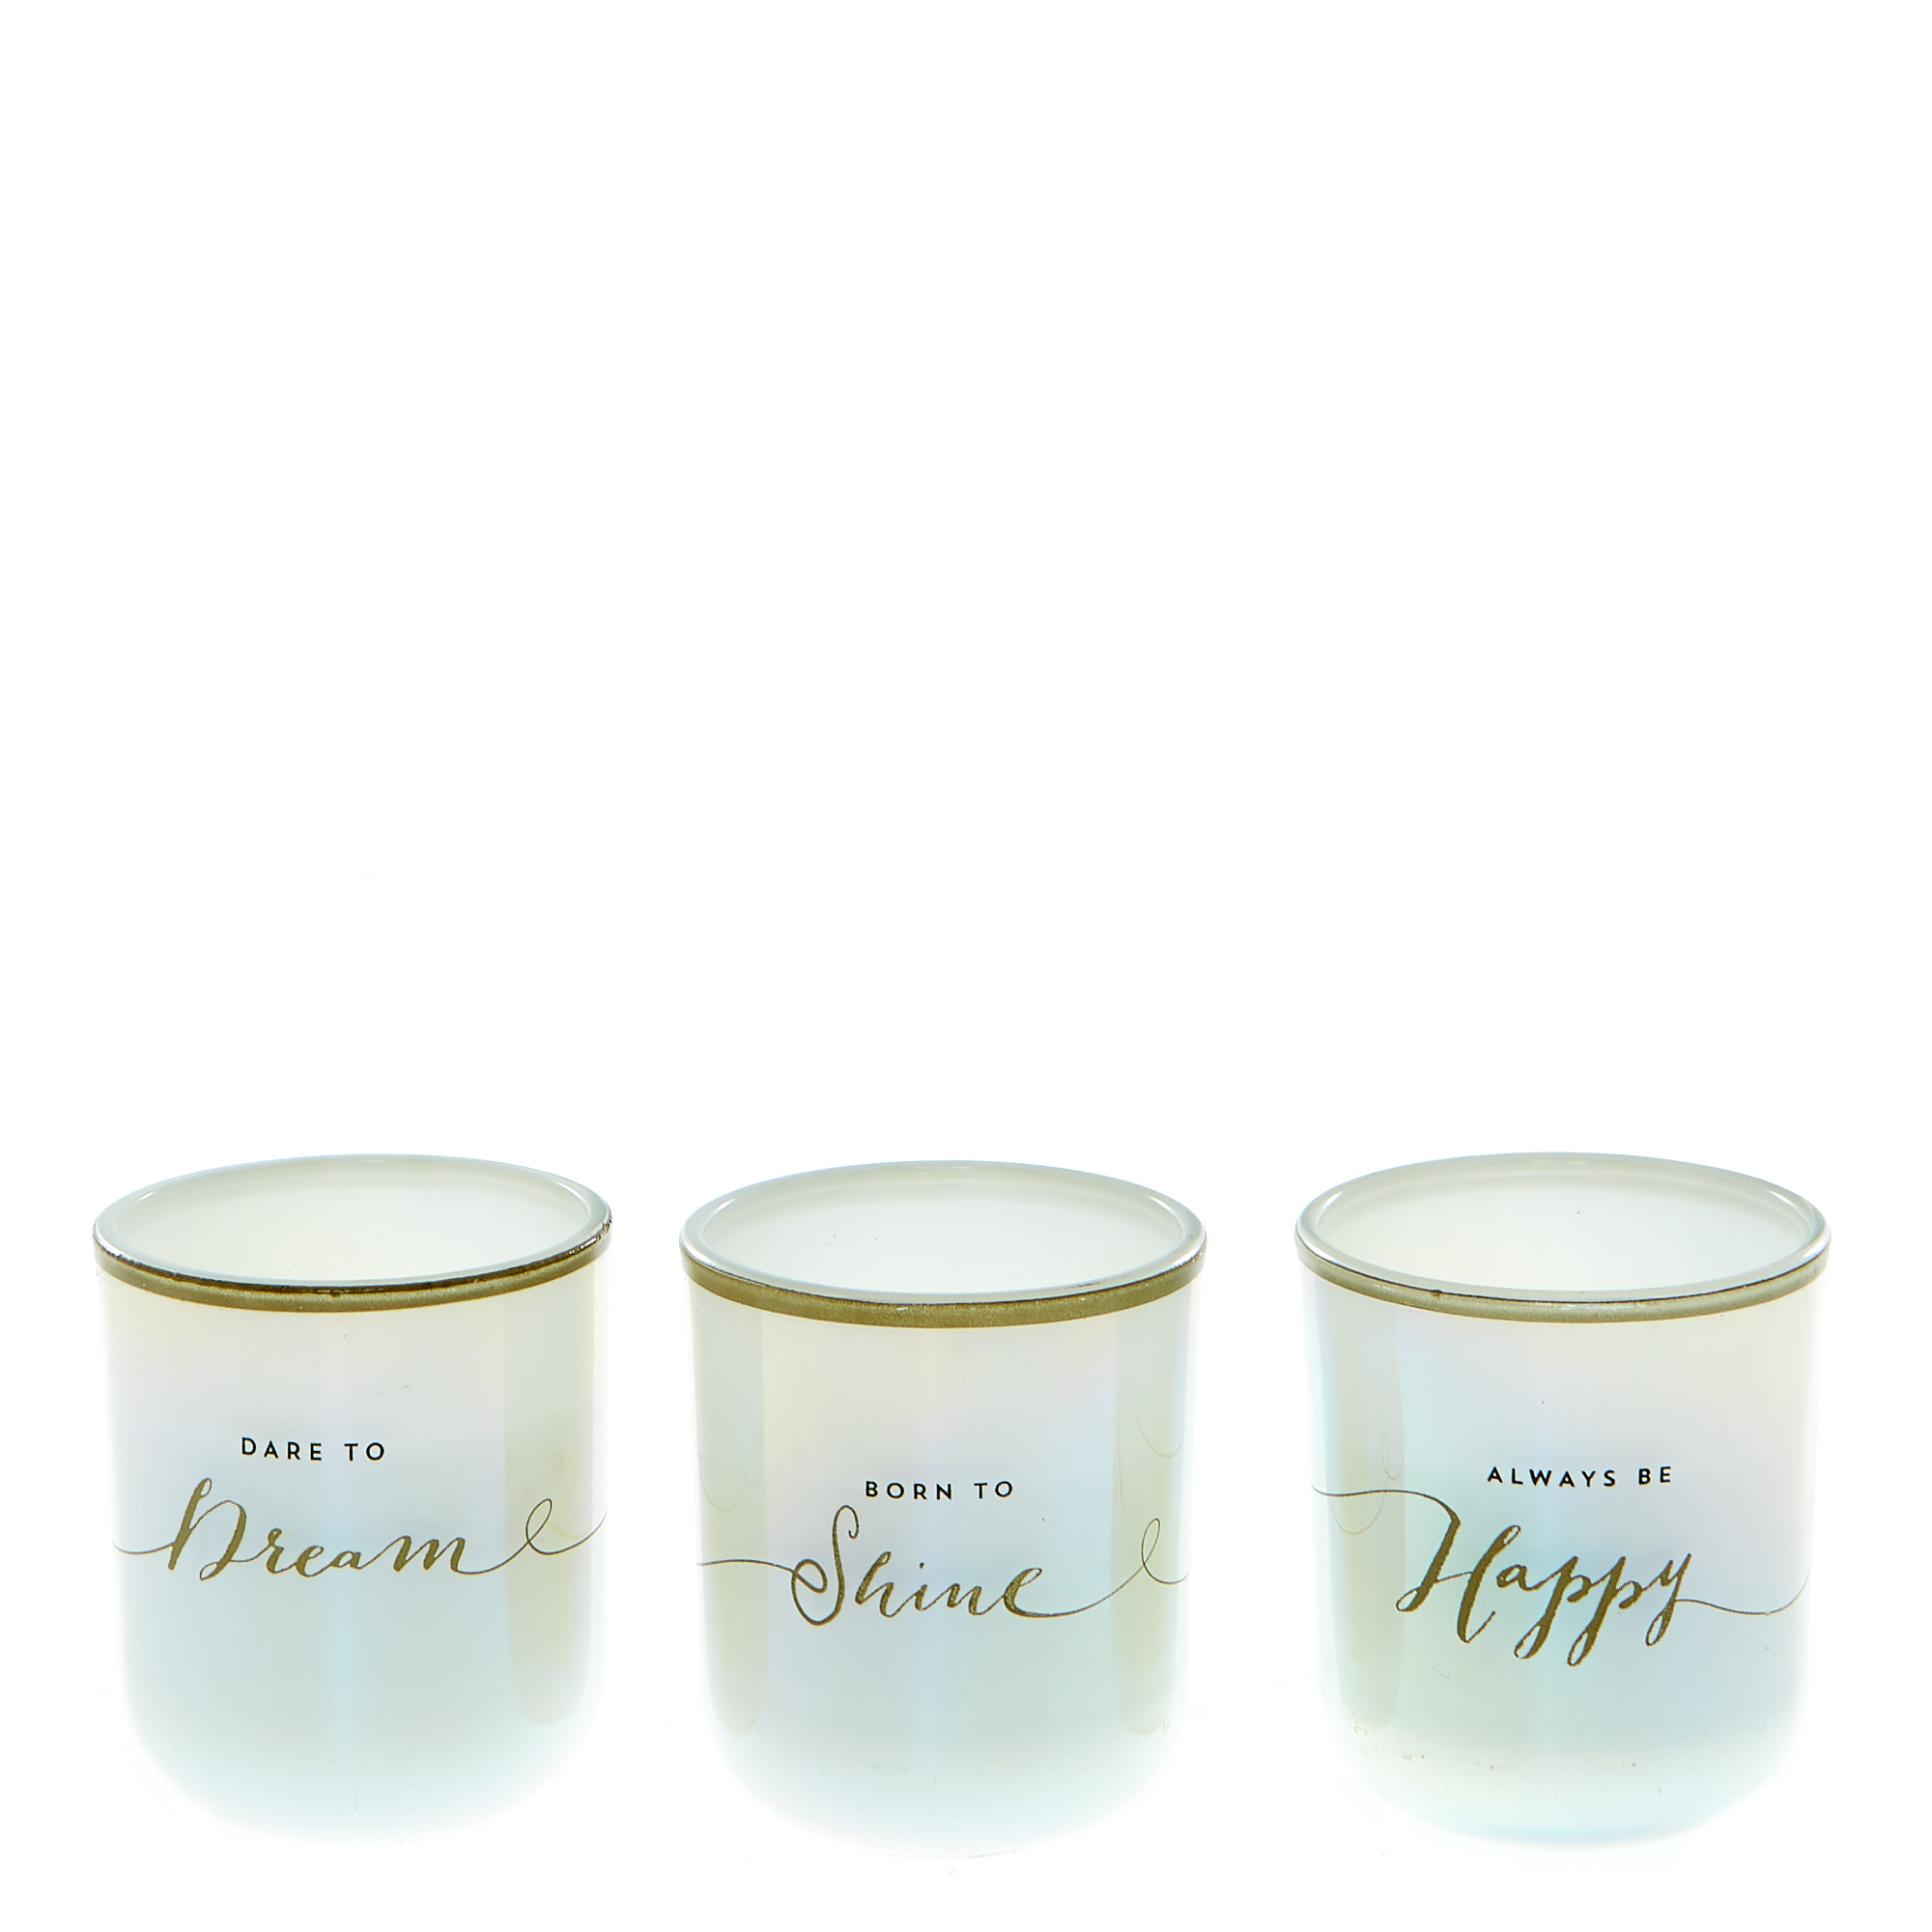 Shine Your Light Scented Candles - Set Of 3